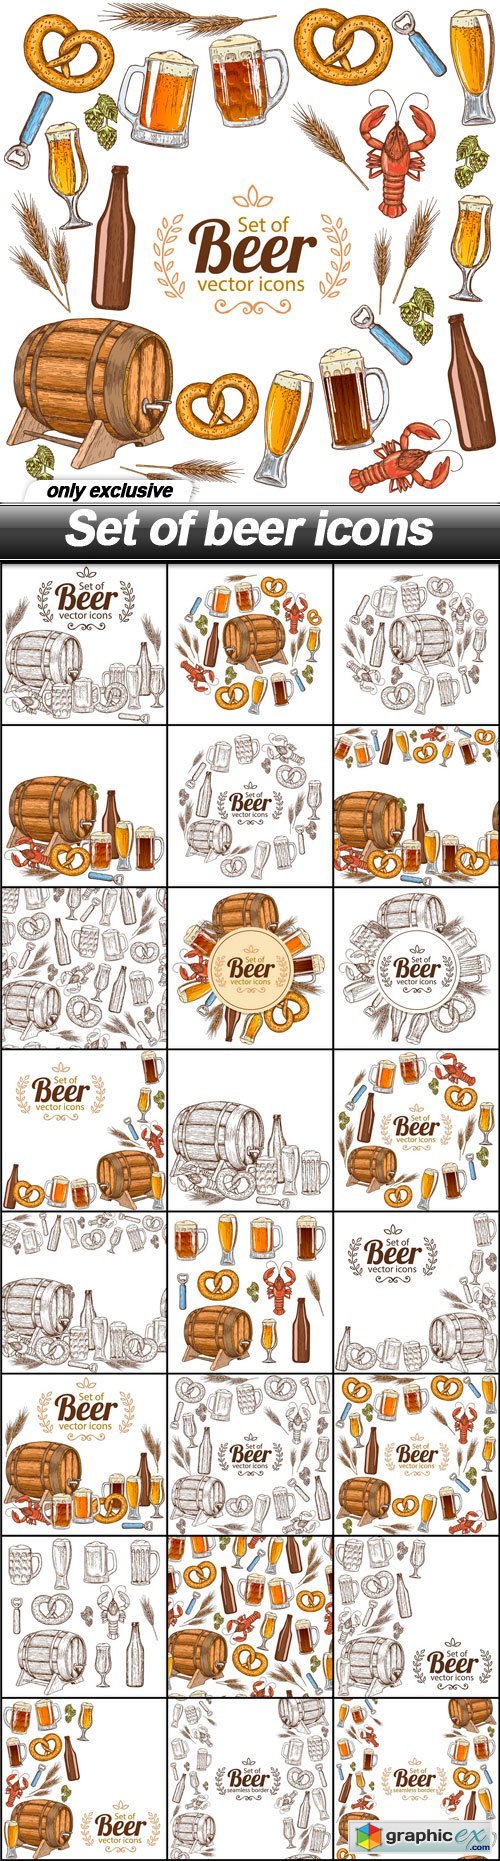 Set of beer icons - 24 EPS